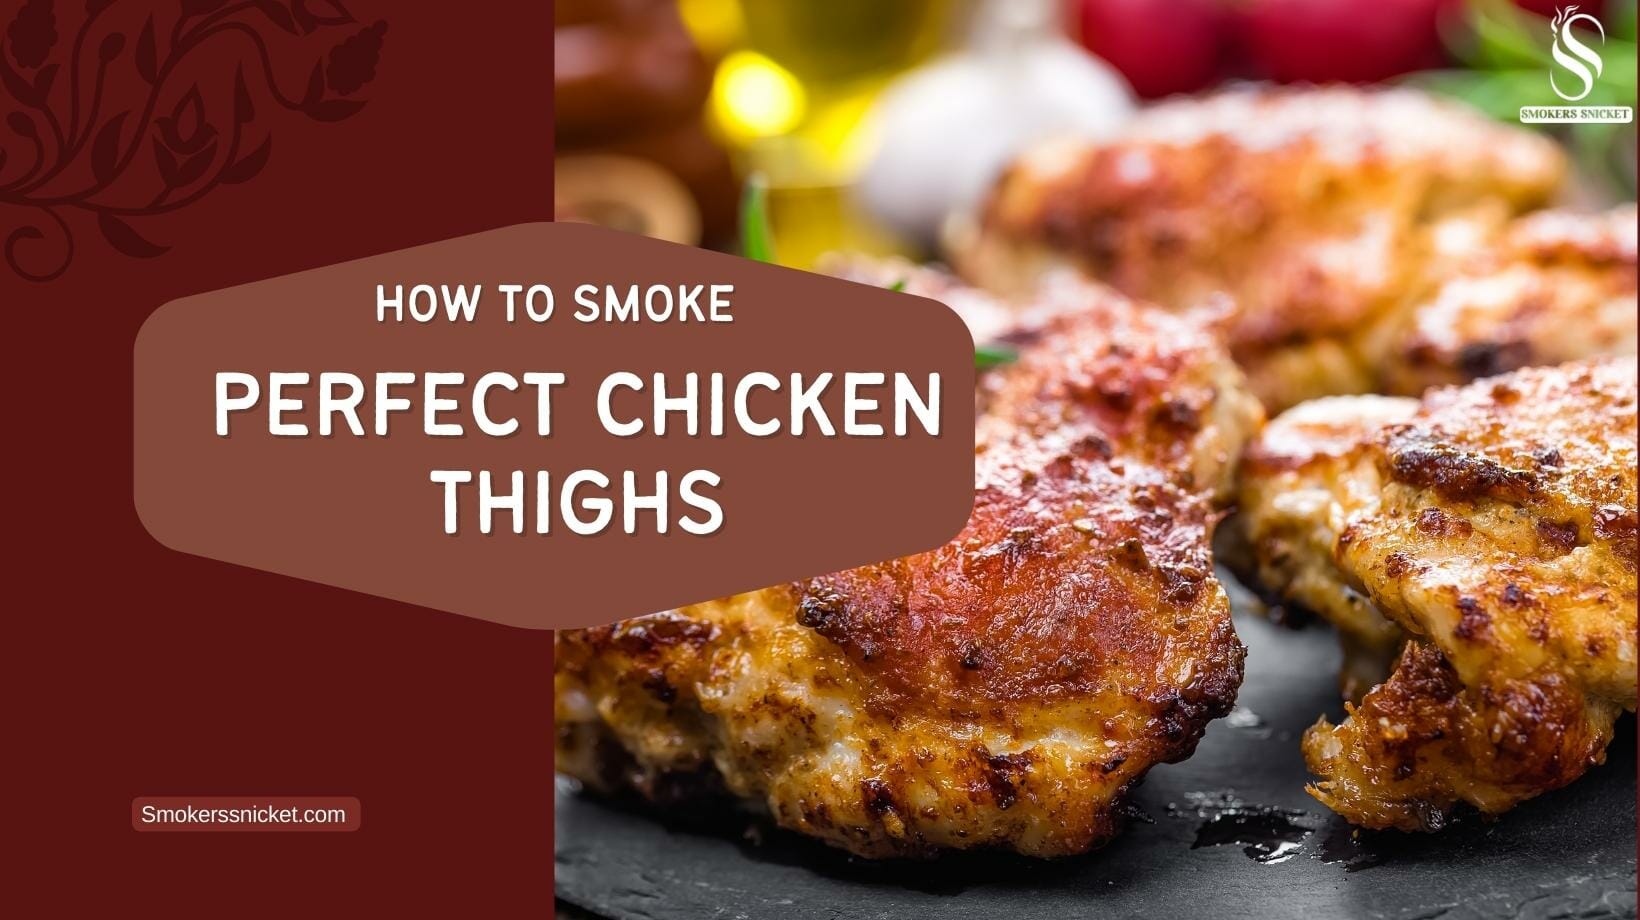 HOW TO SMOKE CHICKEN THIGHS